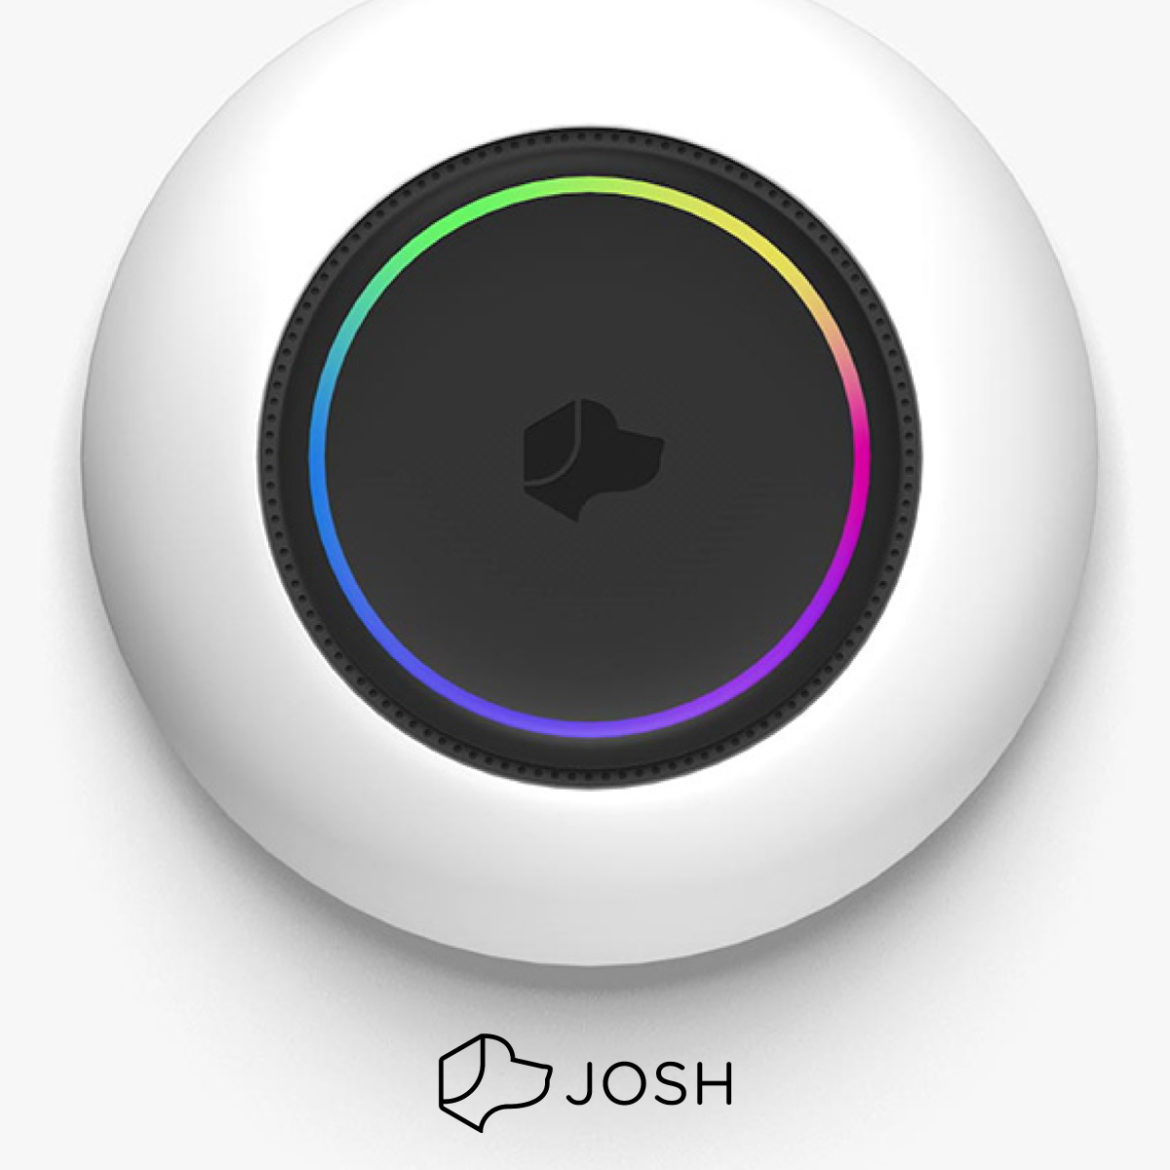 Josh AI Voice Activated Home Automation Solution